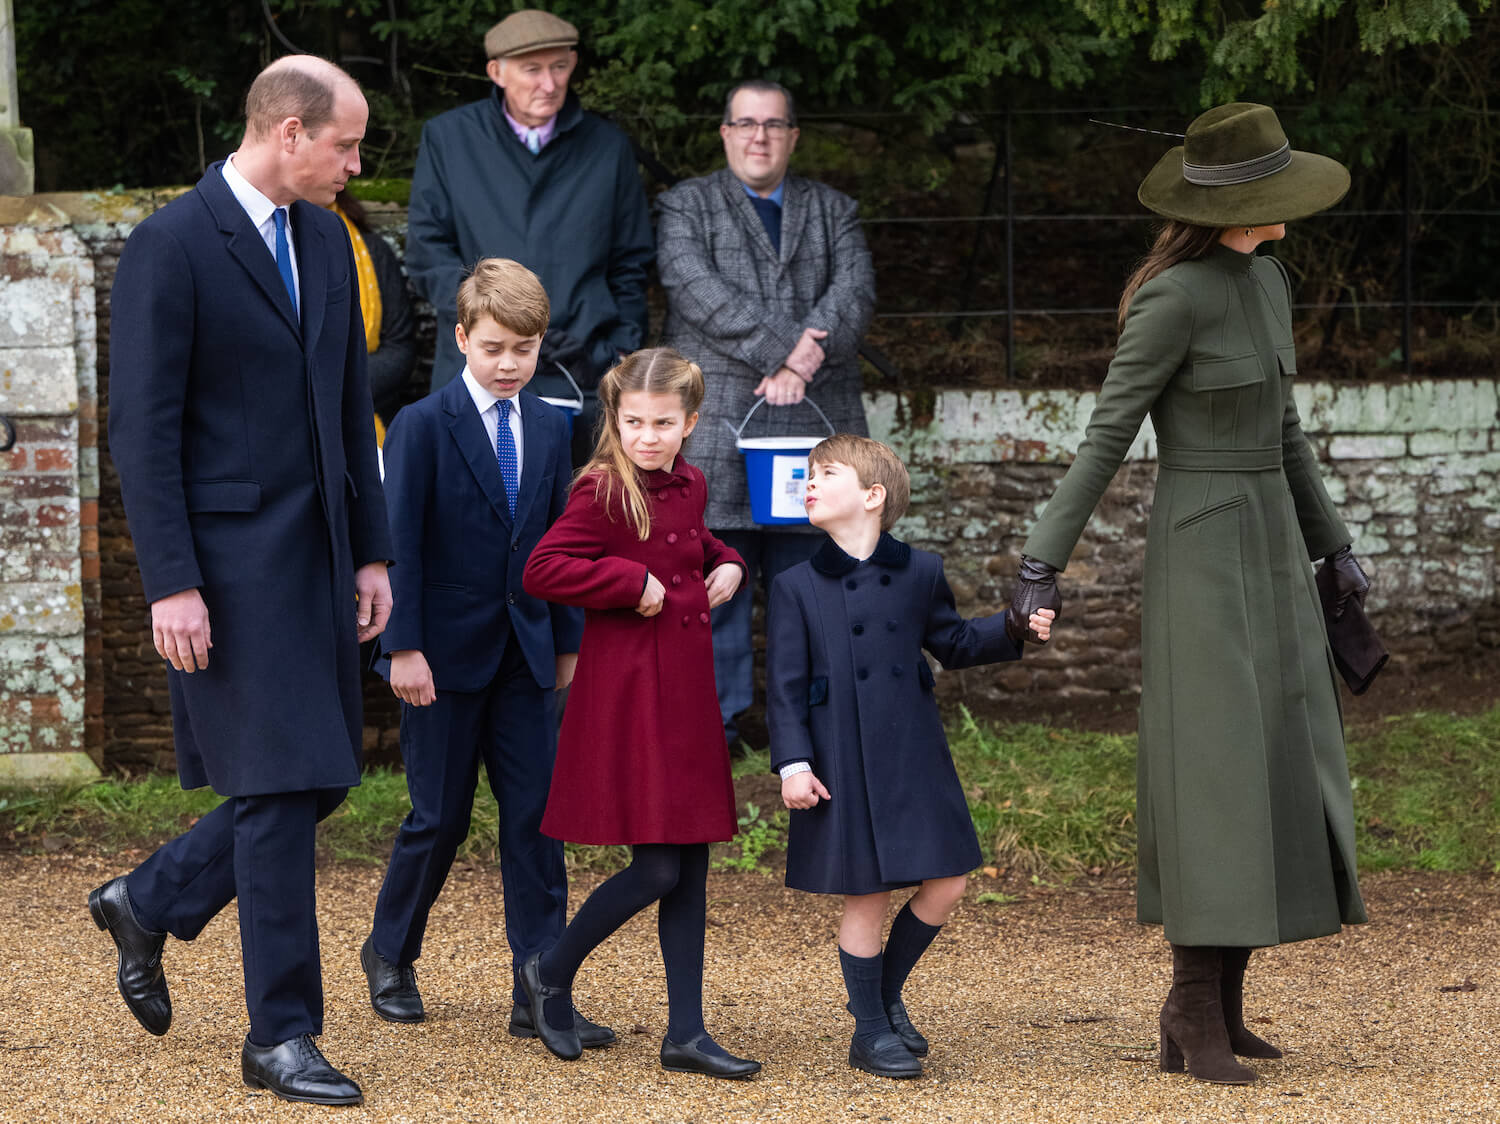 Prince William Is ‘Even-Handed’ With His Children But Has ‘Extra Dimension’ Relationship With 1 Child, Body Language Expert Says